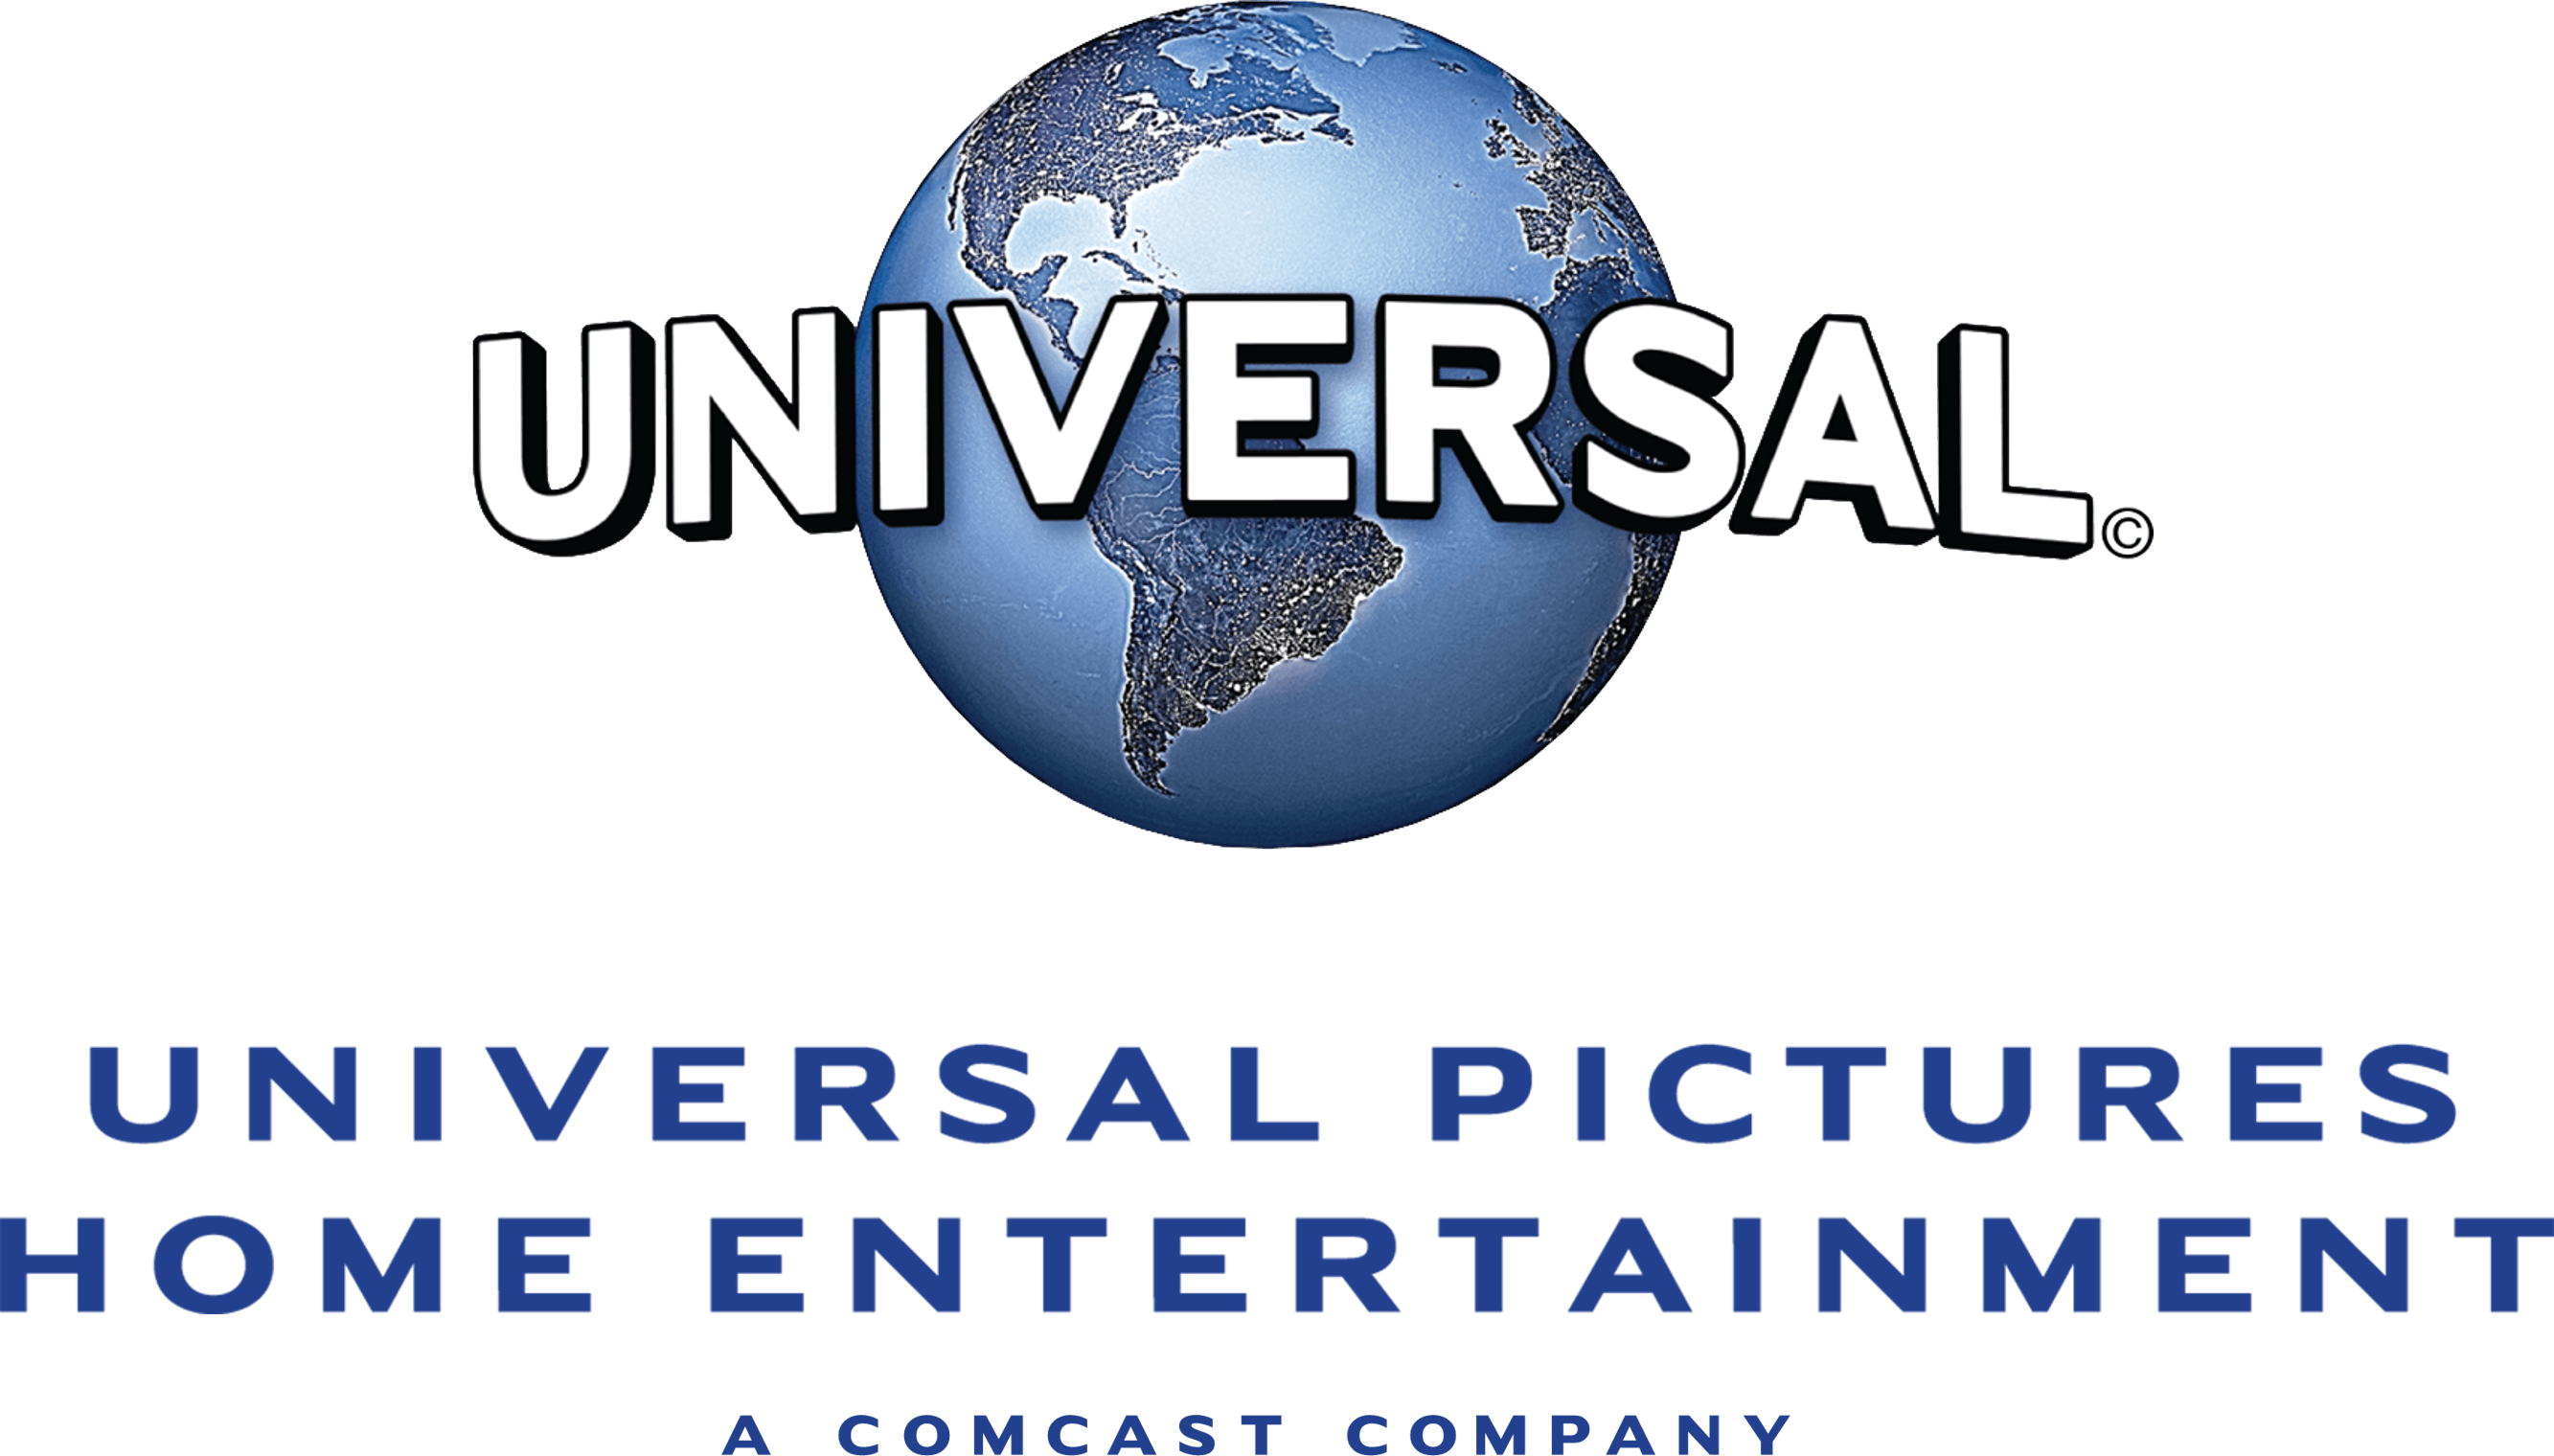 Universal a Comcast Company Logo - Image - Universal Pictures Home Entertainment Logo (2016) with the ...